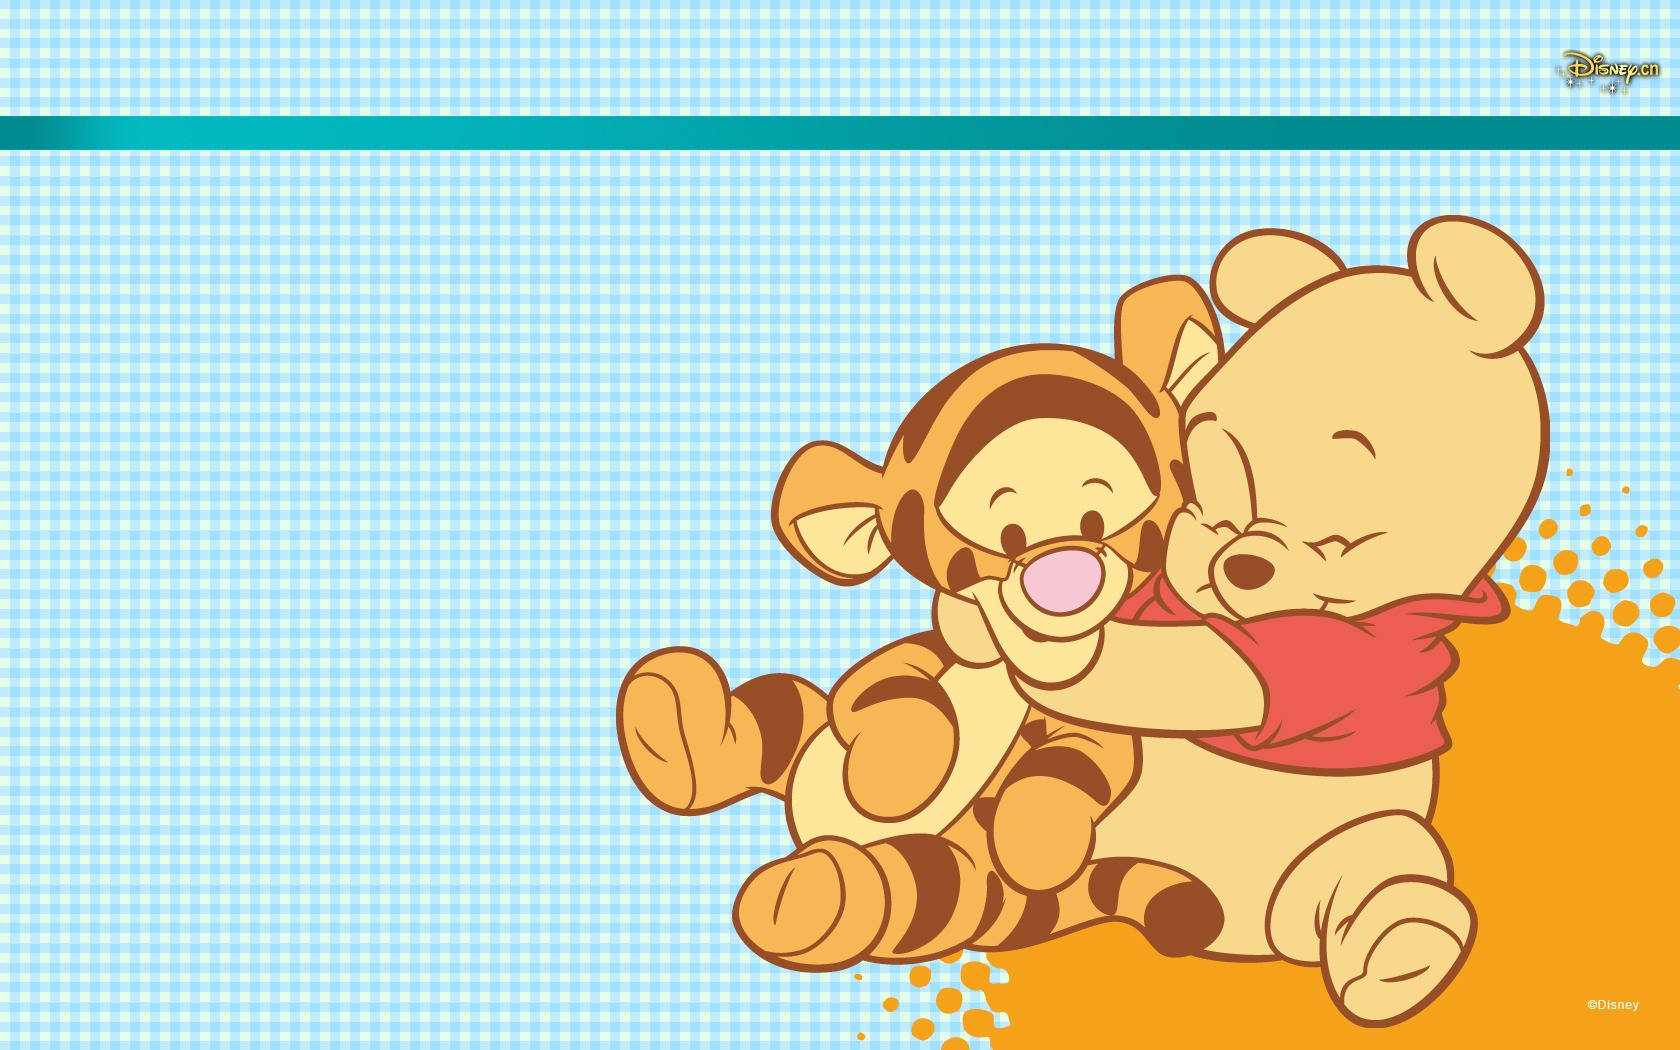 Cool Winnie The Pooh Iphone Theme Wallpaper